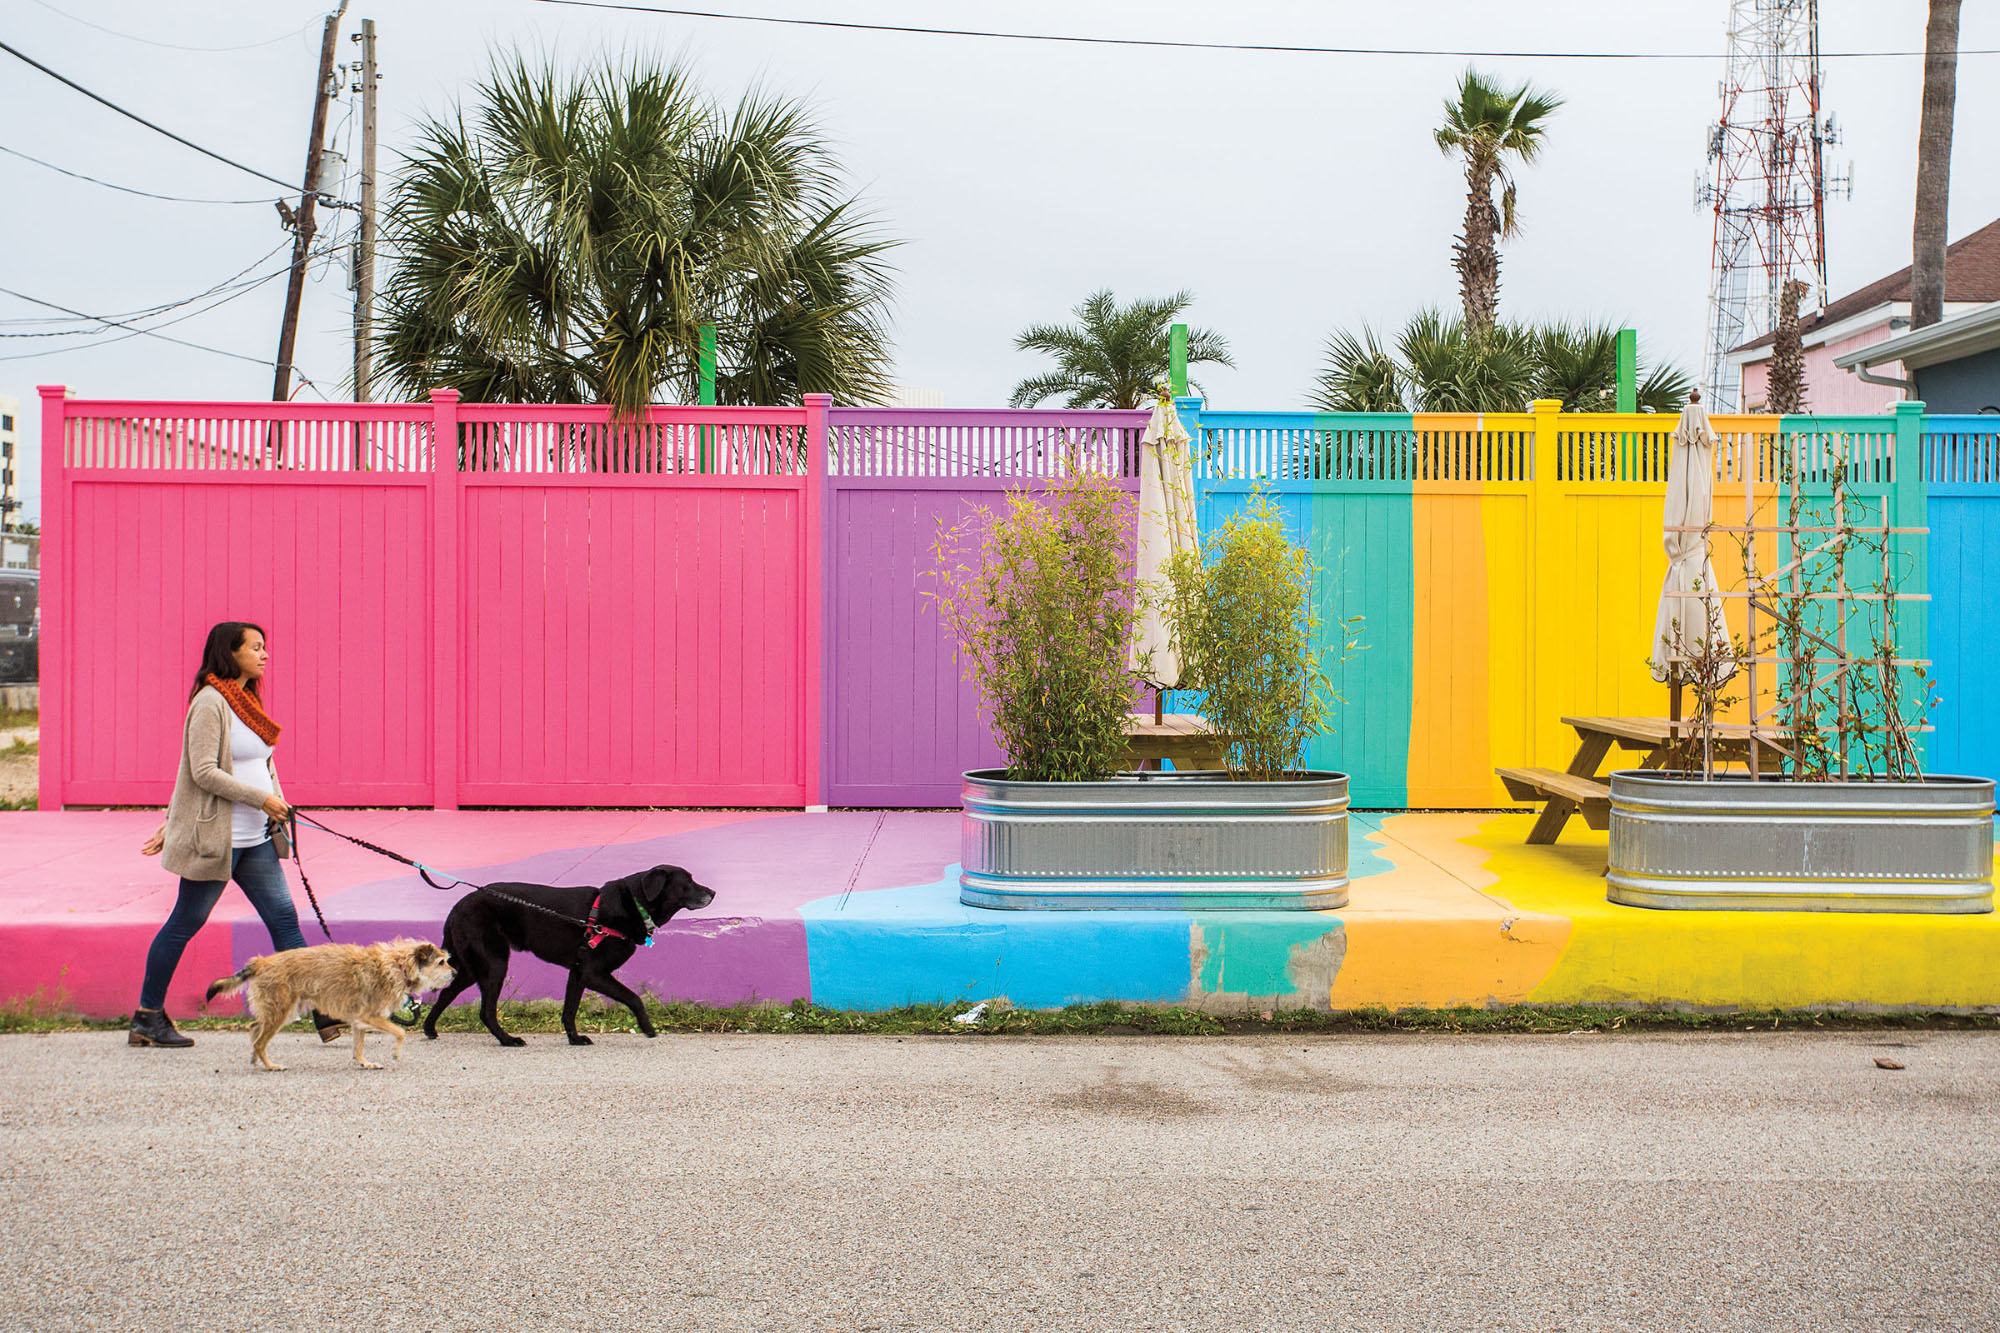 A woman walks a large black dog in front of brightly-colored walls and palm trees under a gray sky in Galveston